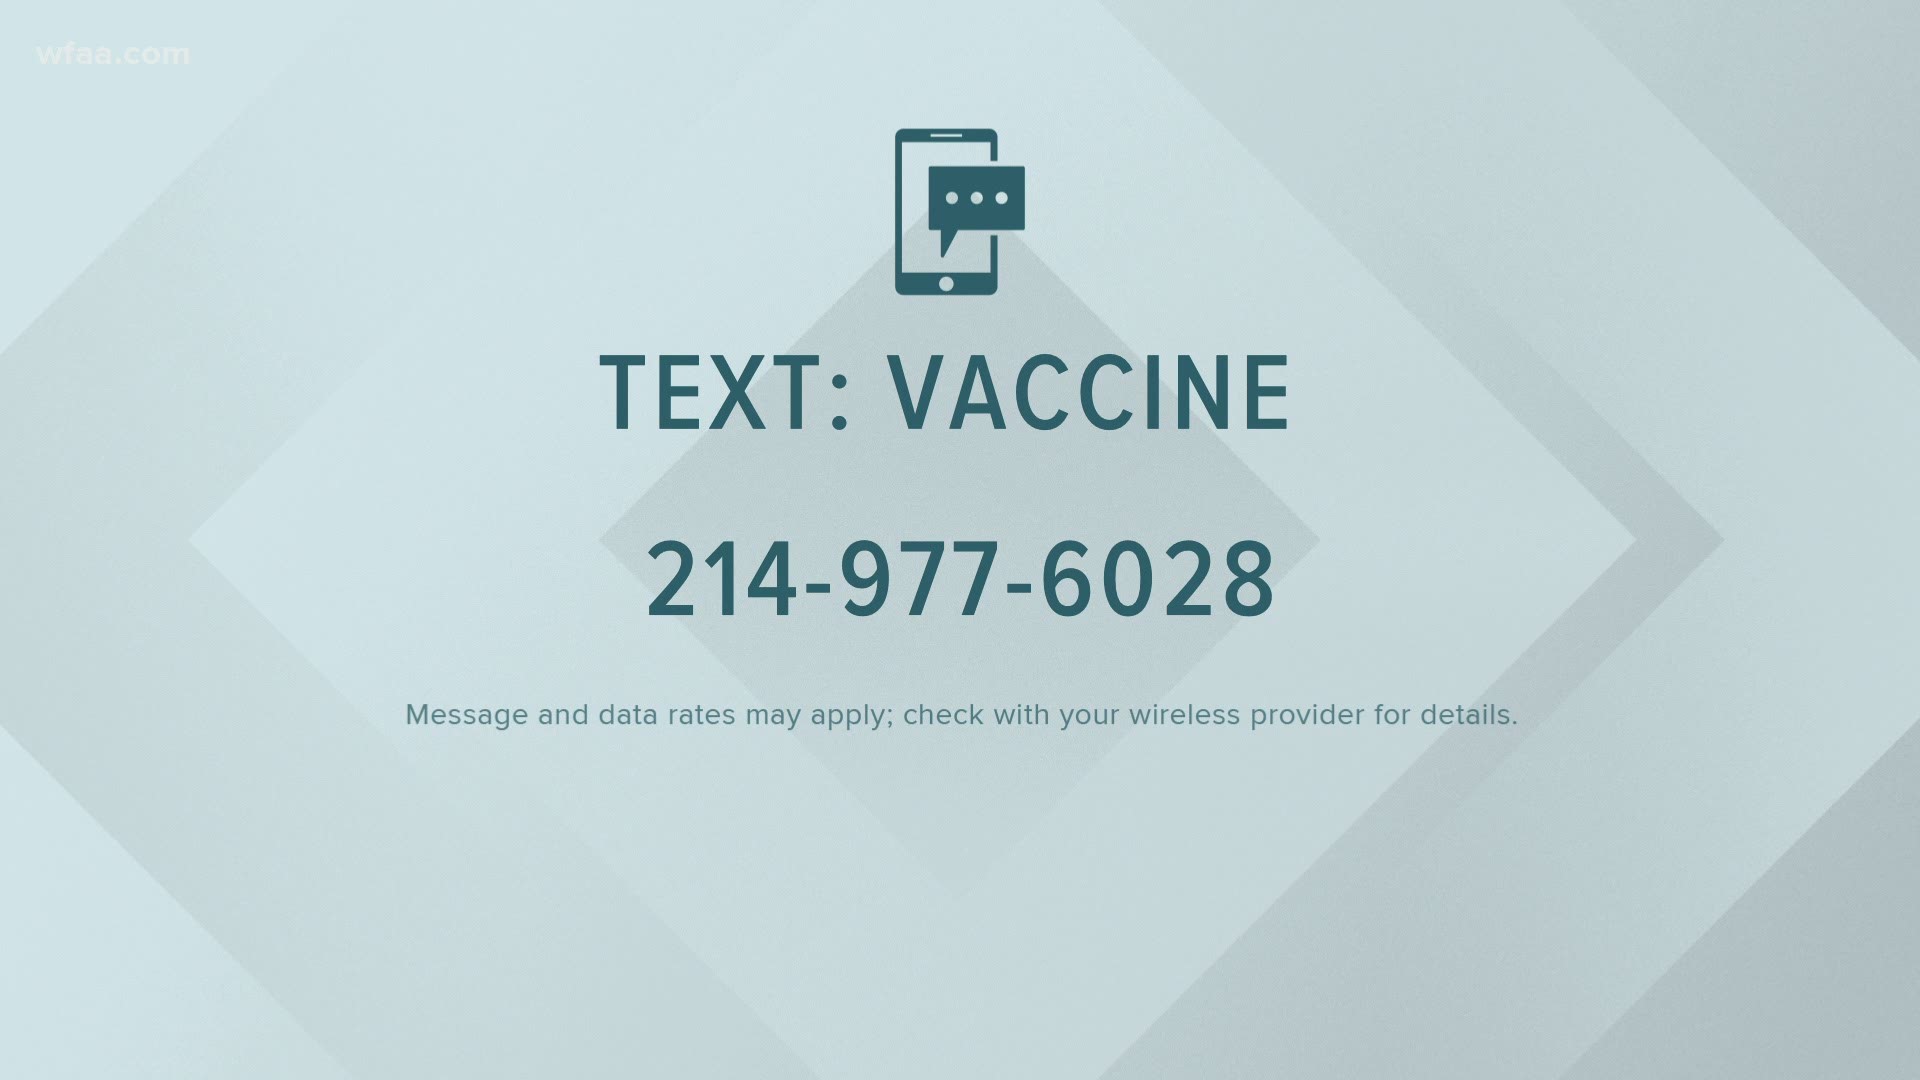 Text the word 'VACCINE' to 214-977-6028 to get more information about how to register for immunization.